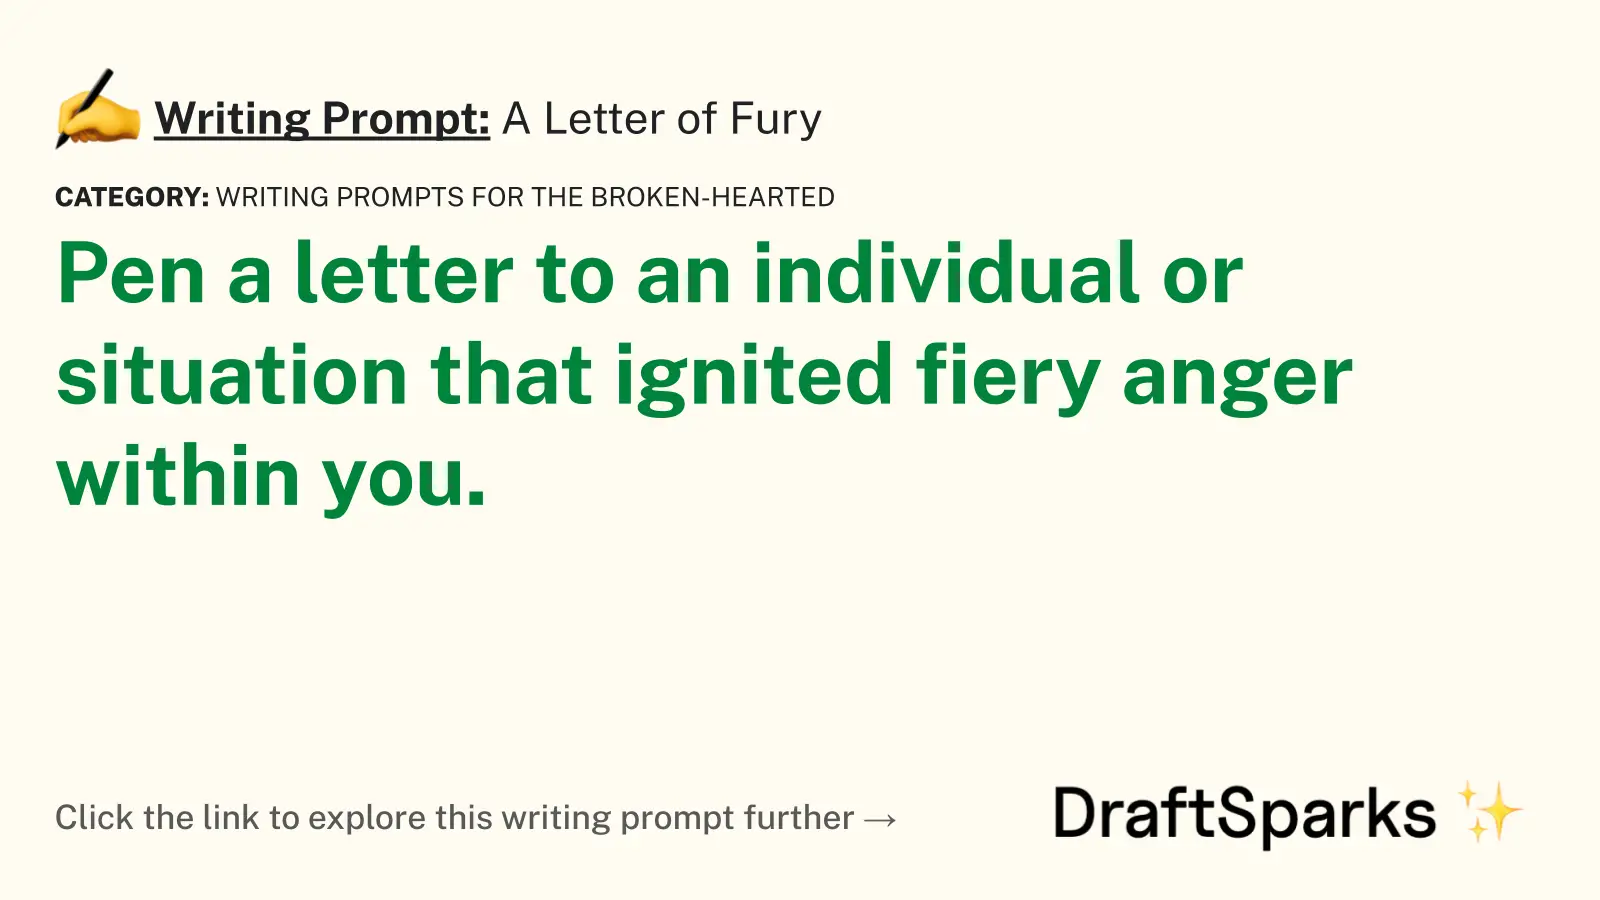 A Letter of Fury